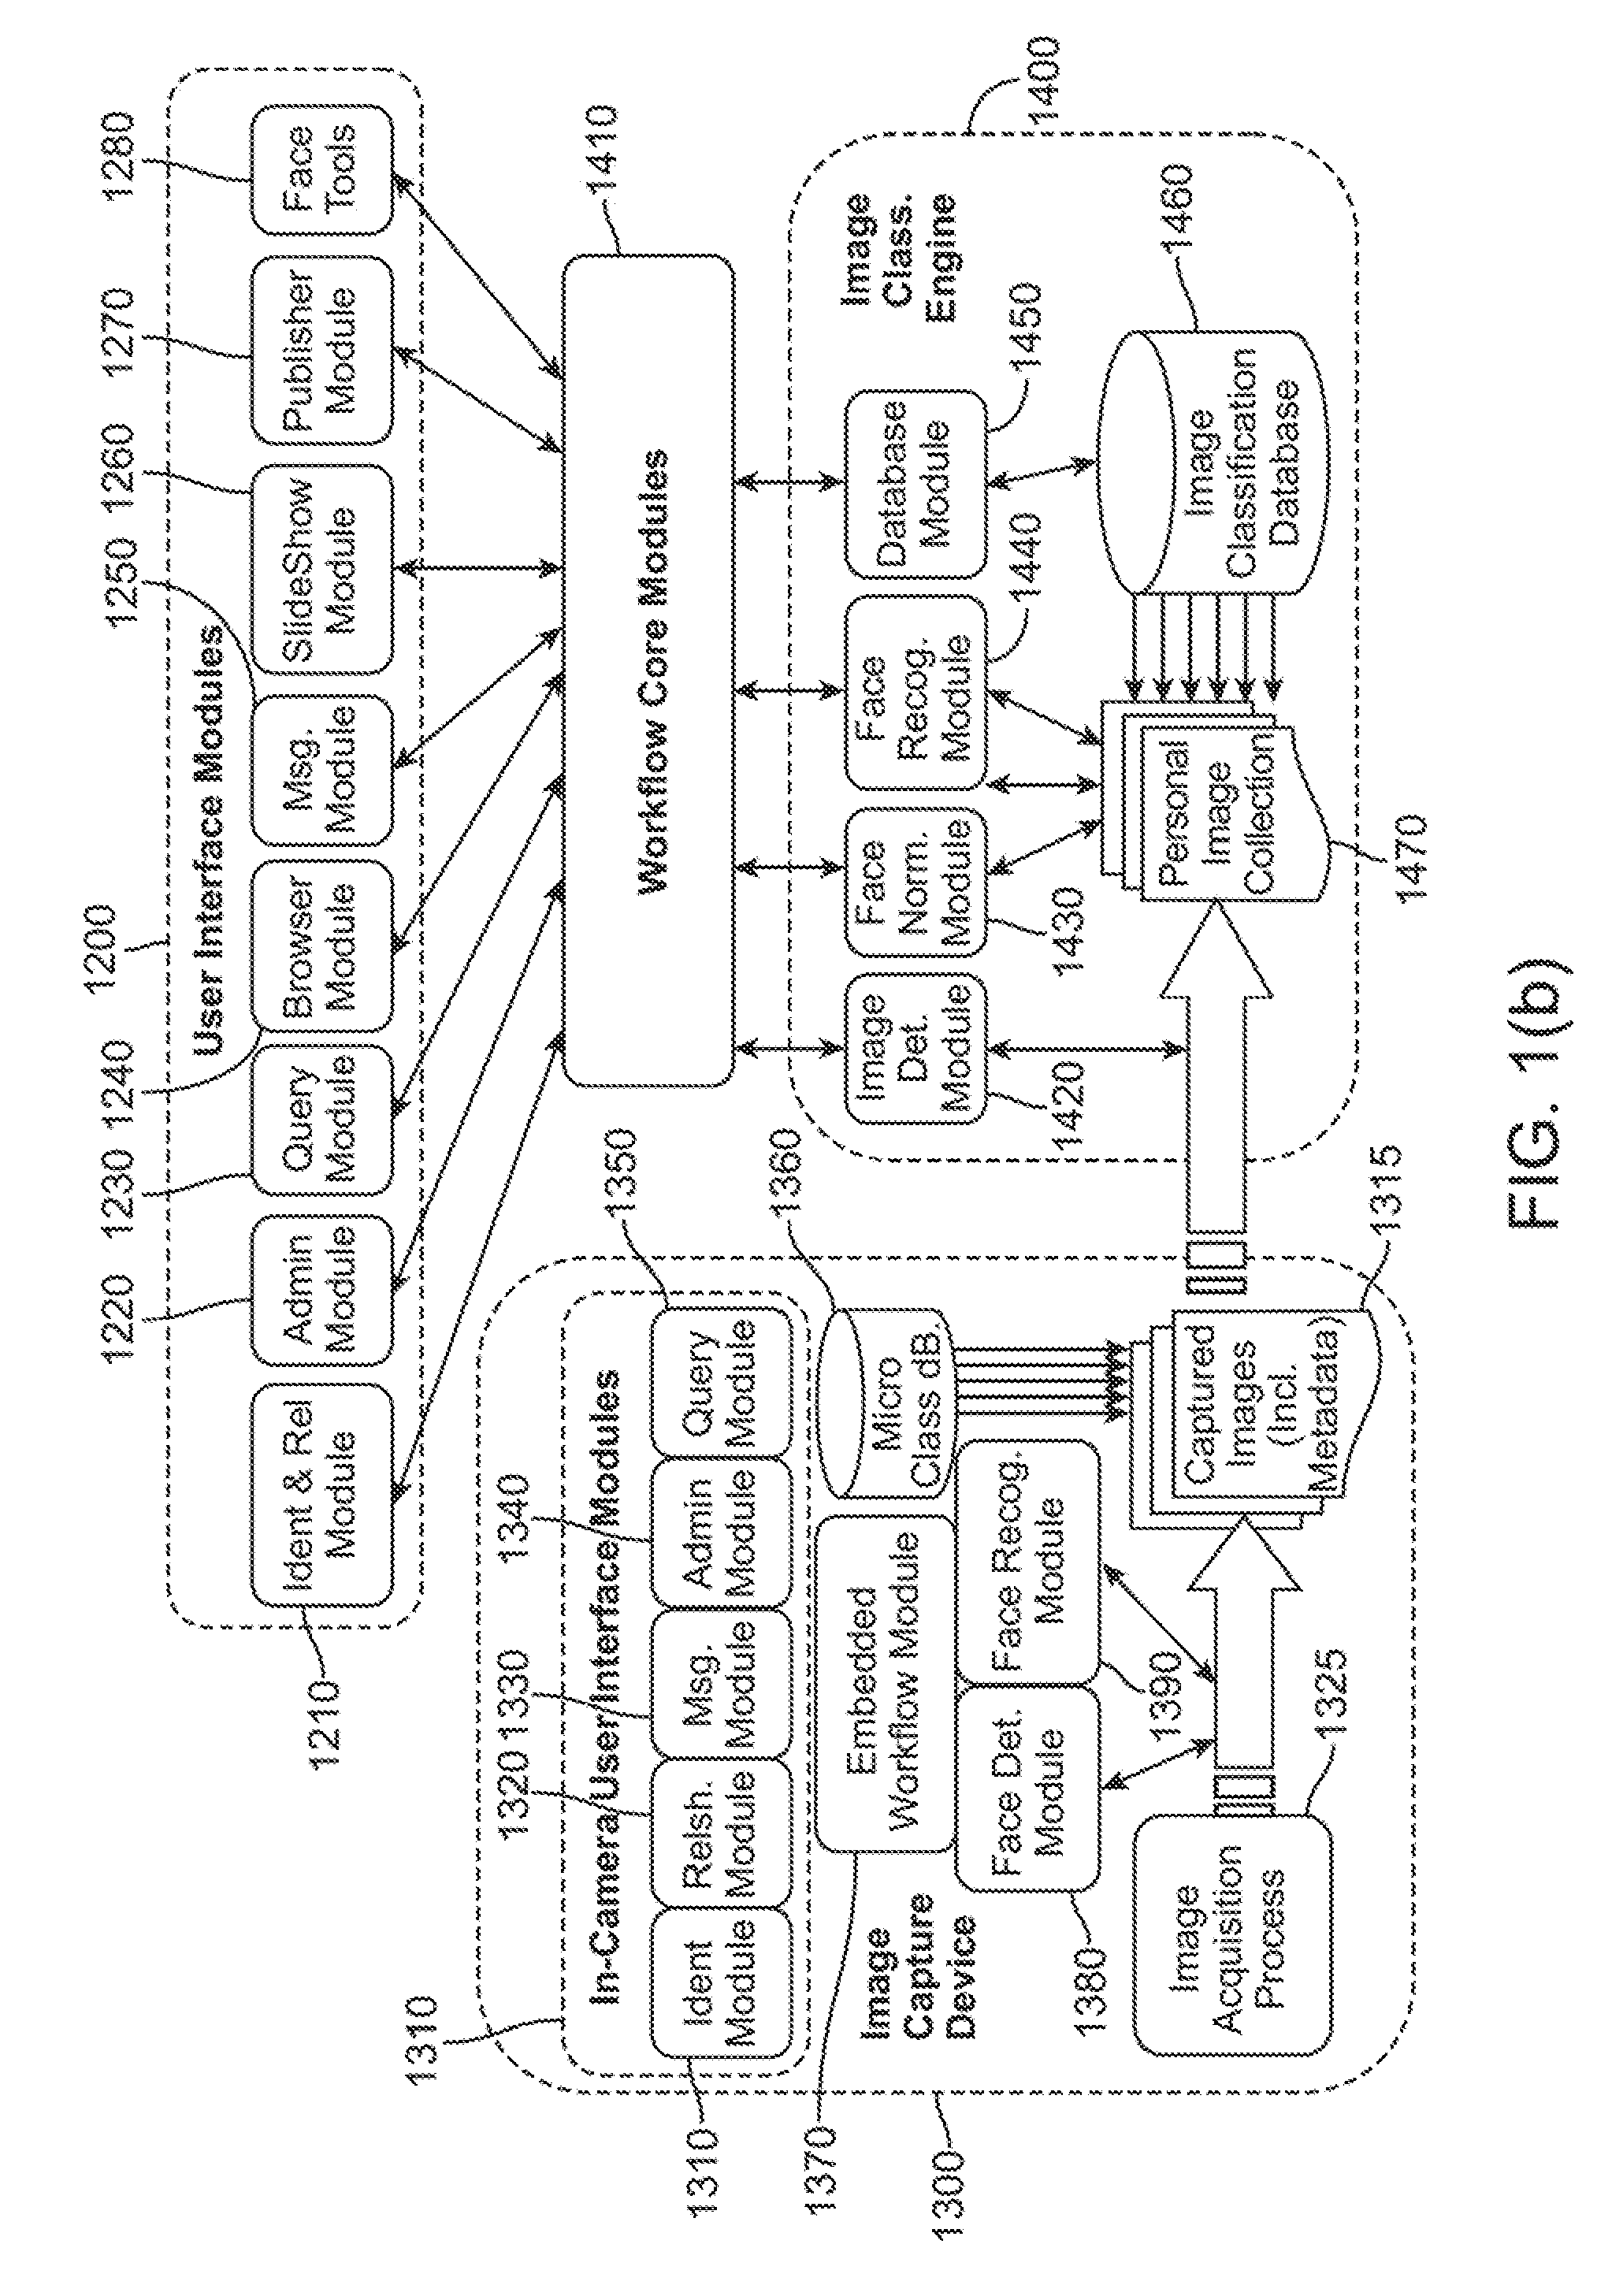 Classification System for Consumer Digital Images using Automatic Workflow and Face Detection and Recognition